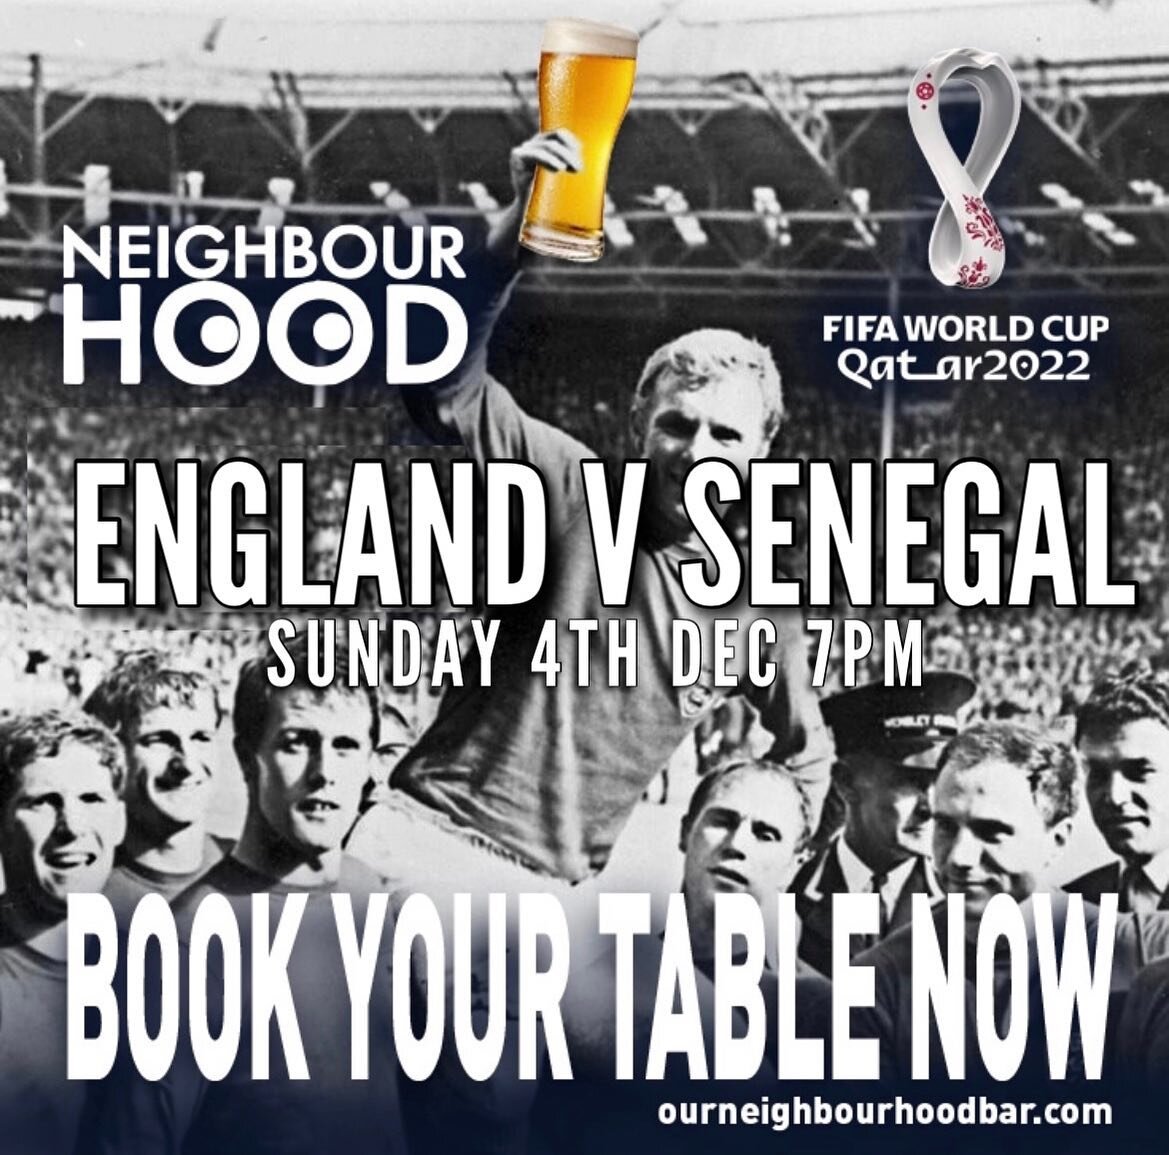 There&rsquo;s a couple of spaces still available www.ourneighbourhoodbar.com